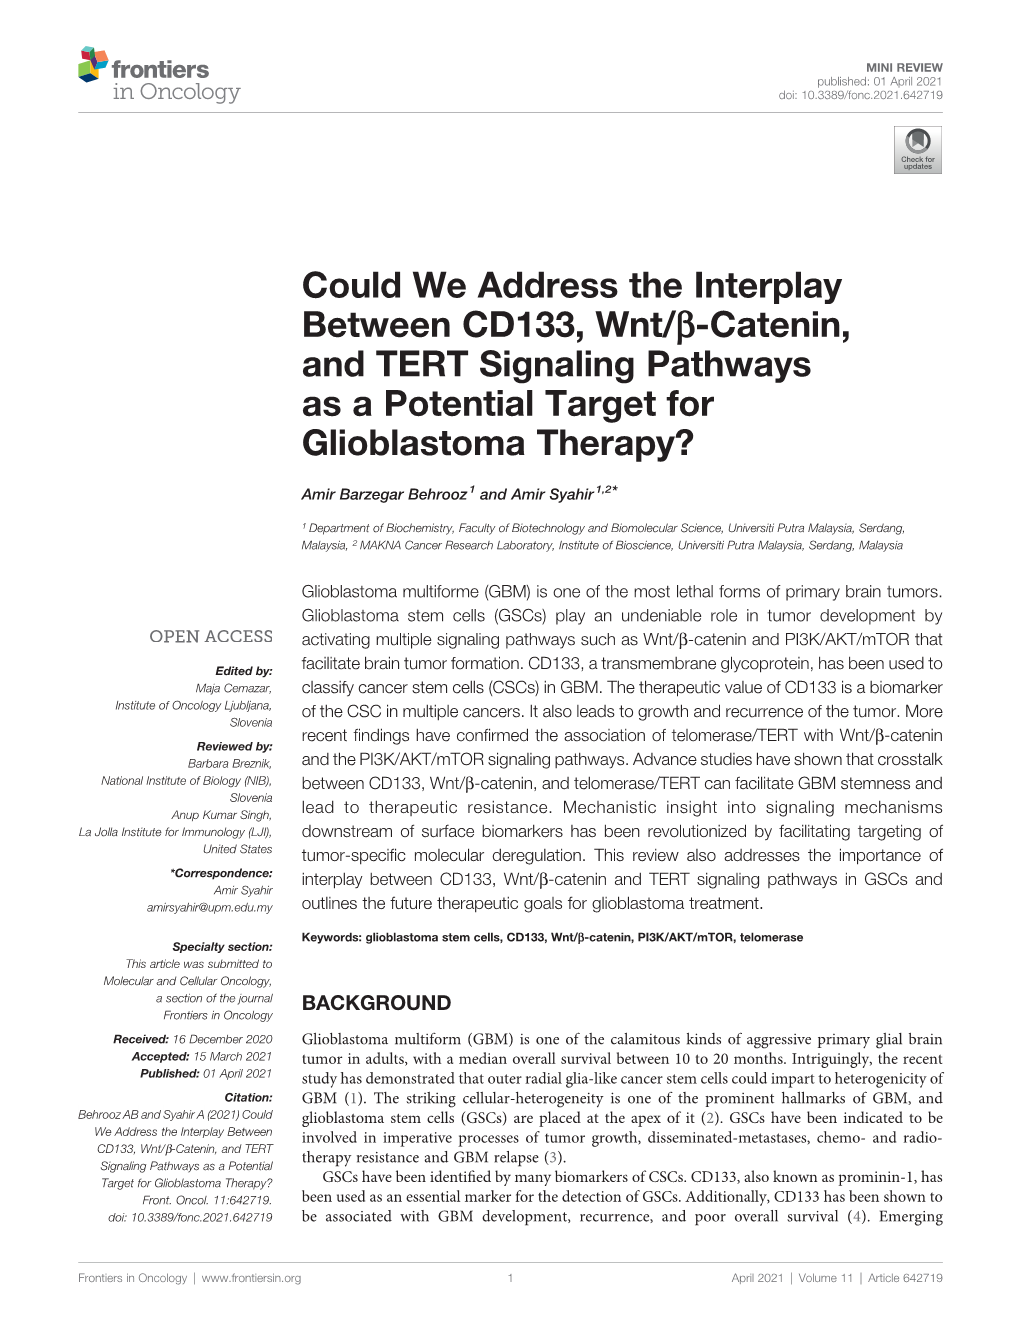 Could We Address the Interplay Between CD133, Wnt/Β-Catenin